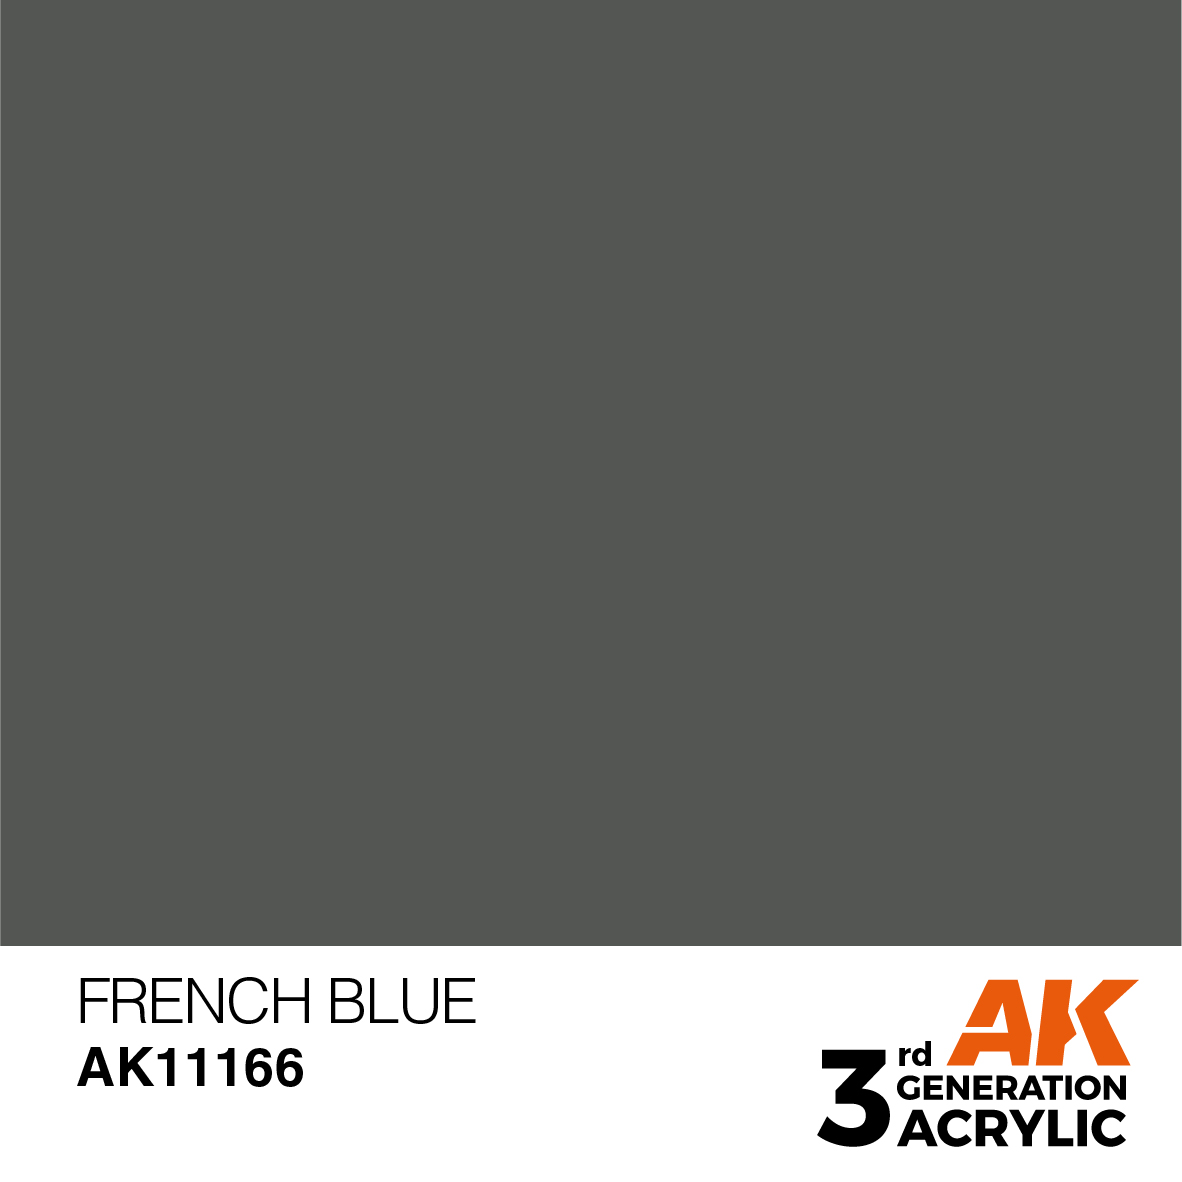 FRENCH BLUE – STANDARD